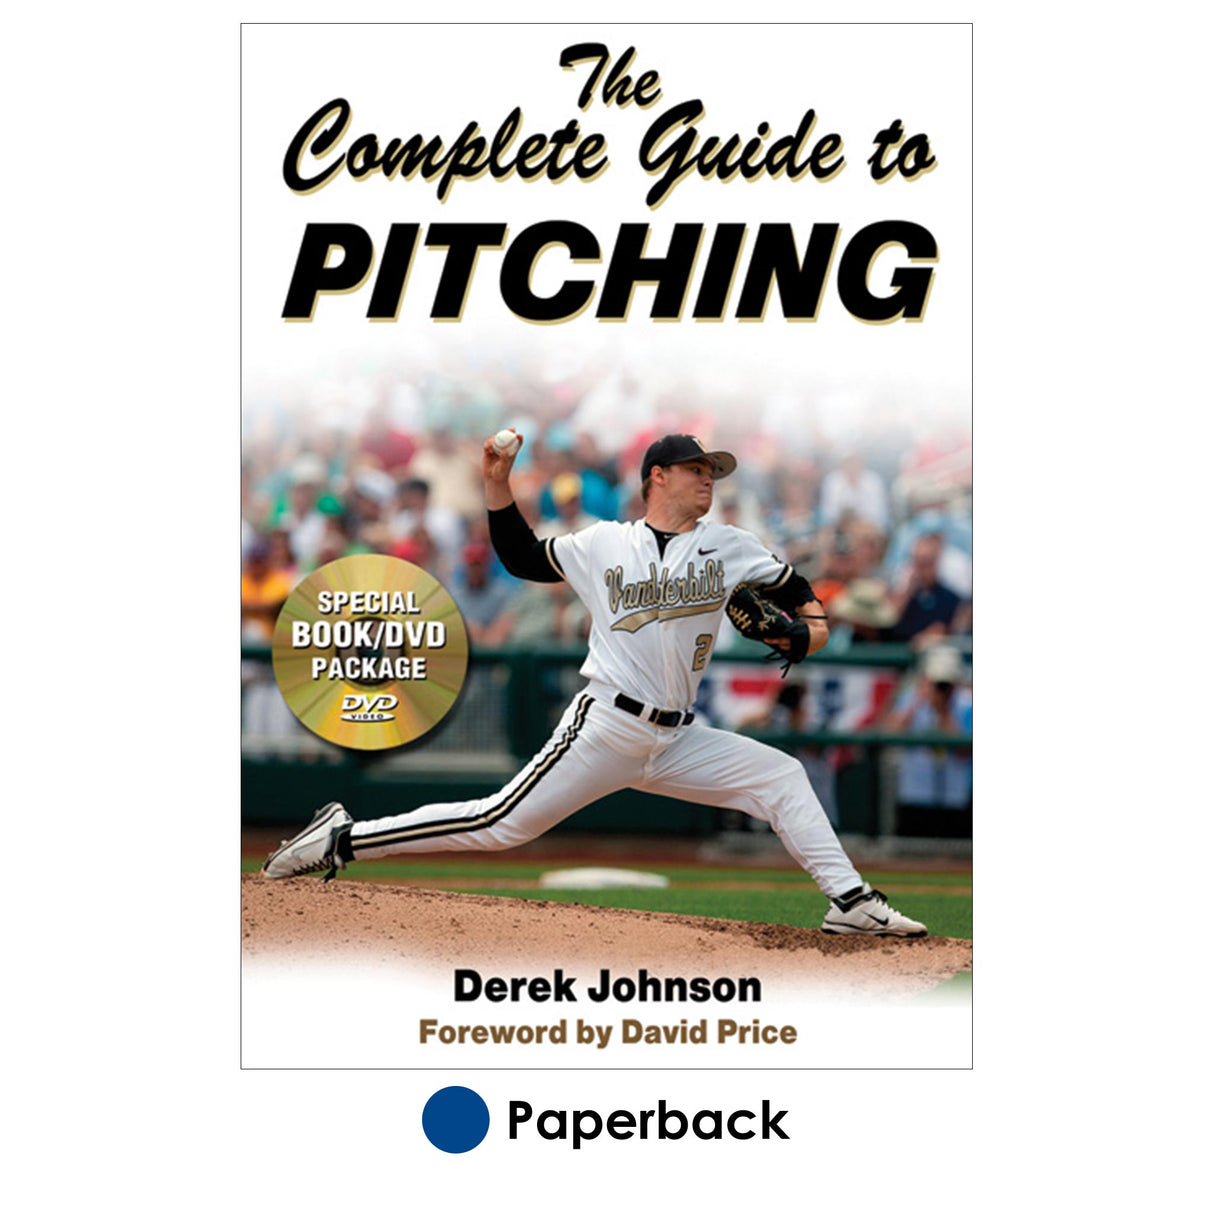 Complete Guide to Pitching, The